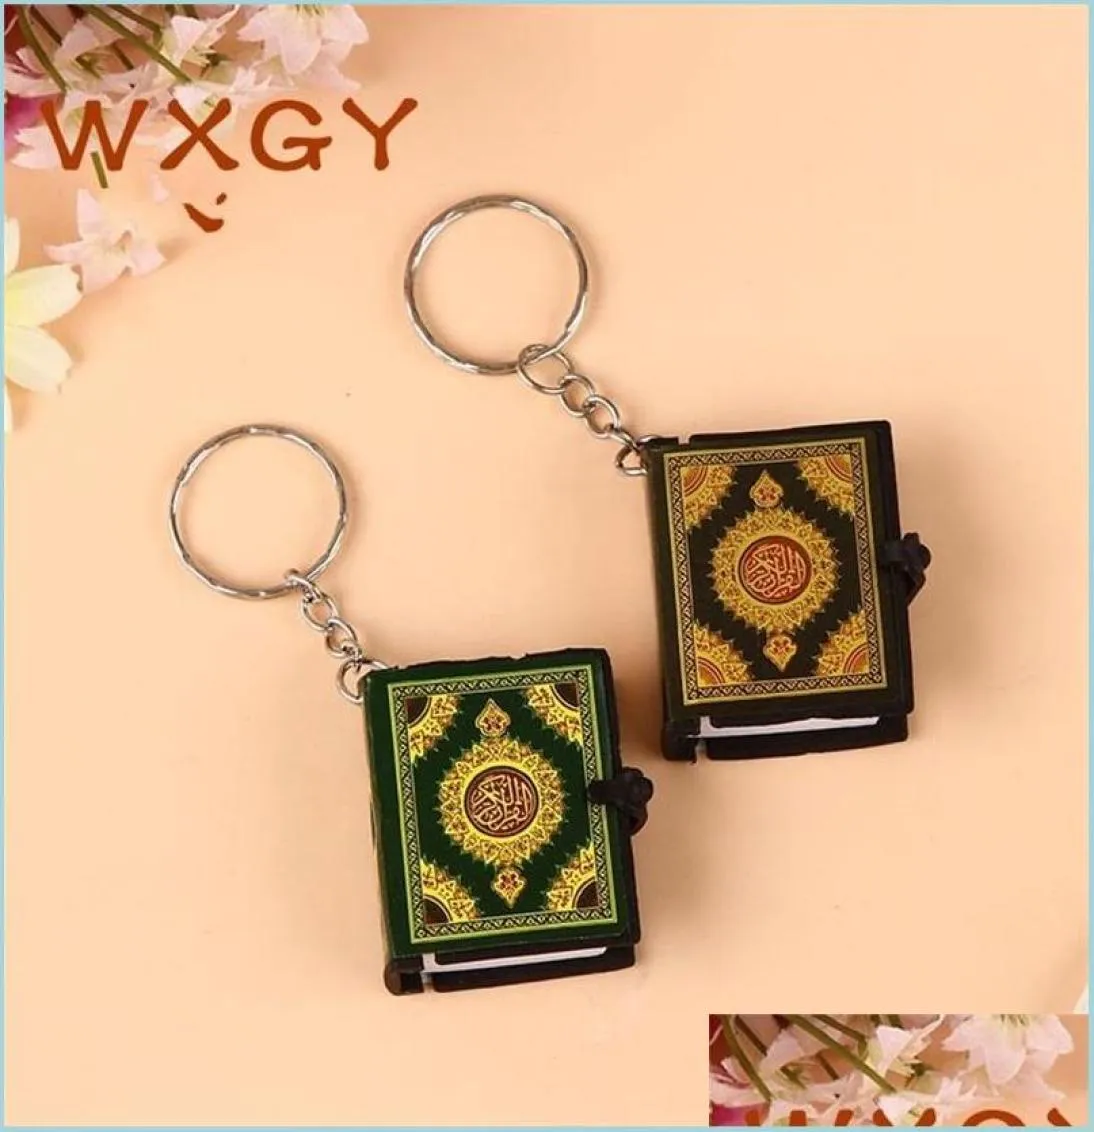 Party Favor Keychain Party Favor Quran Book Cool Cute Car Bag Key Fashionable Accesories Ring Mini Fashion Whole Islam Gift 171833942